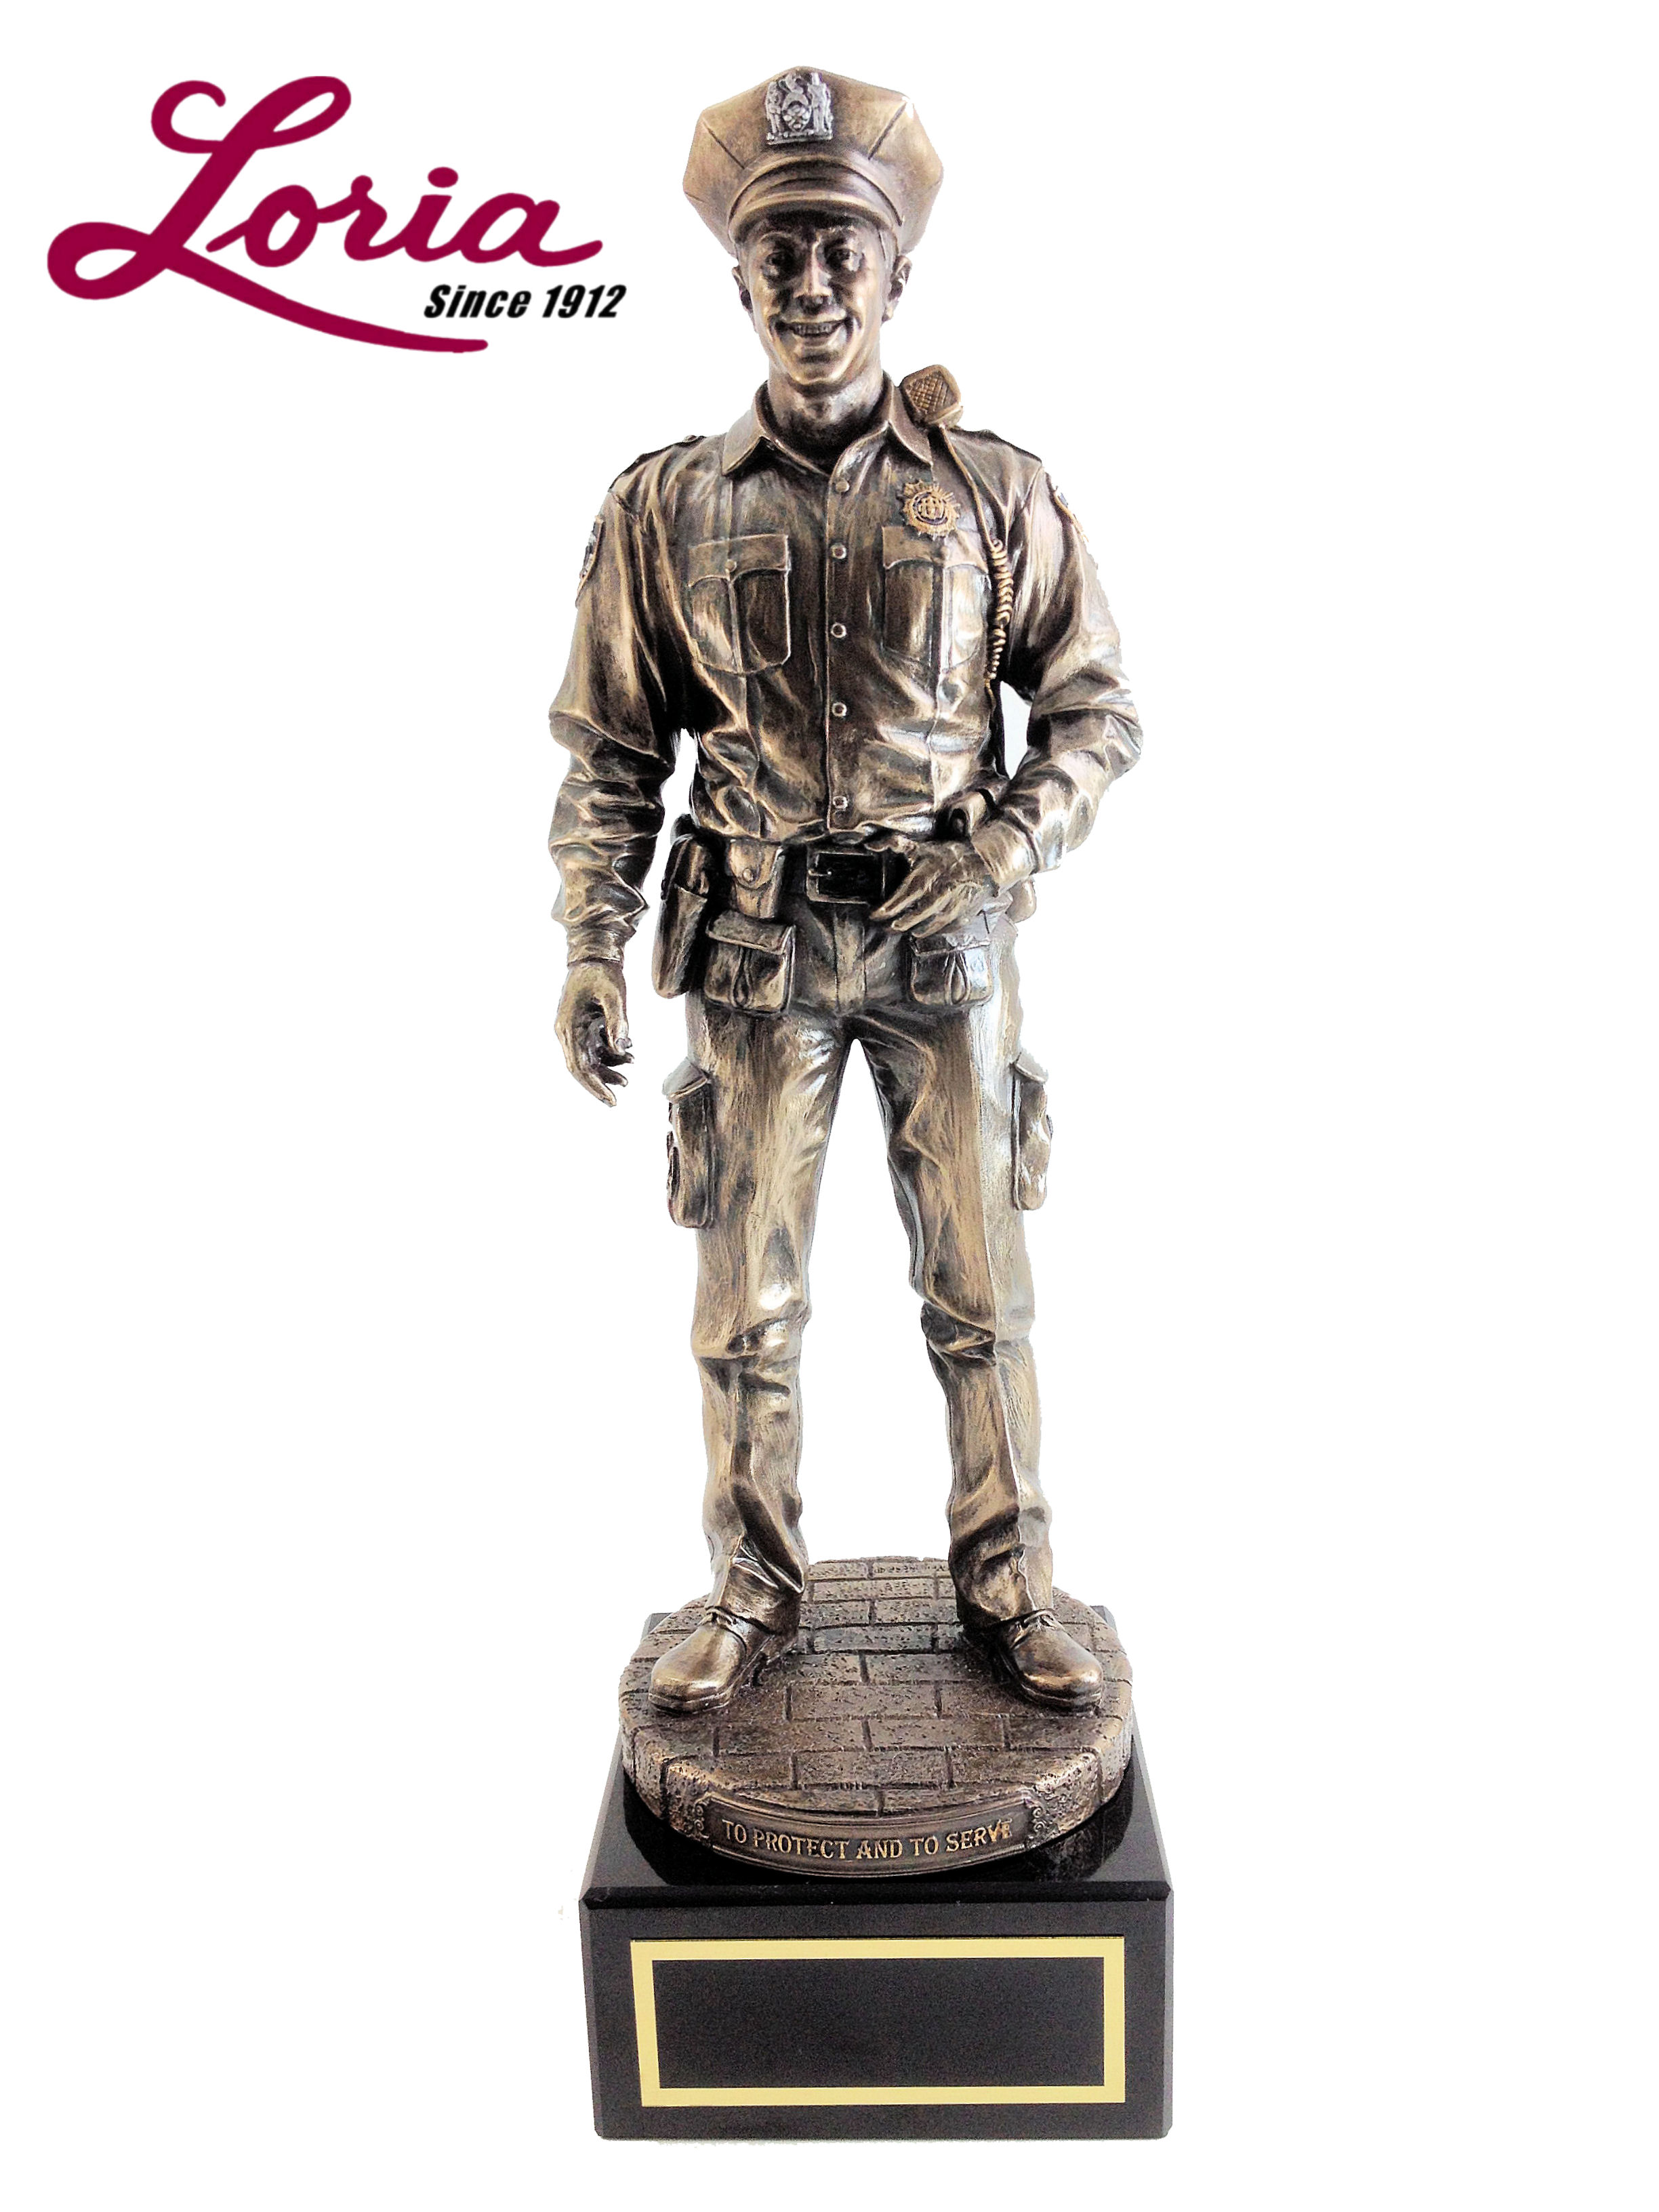 Police Officer Statue for the City of New York @ Loria Awards